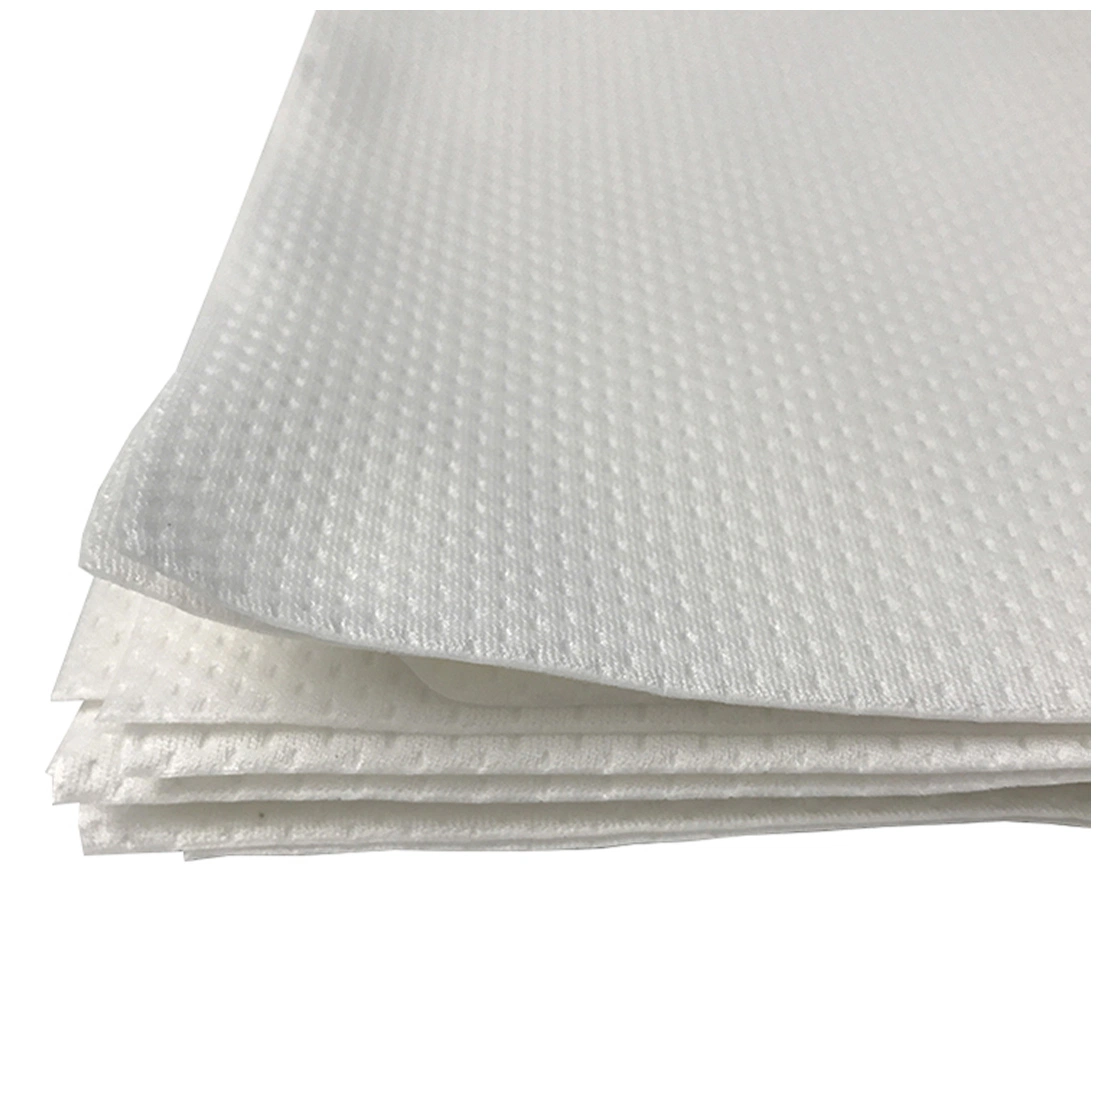 Clean Room Wiper for Cleanroom Cleaning 2 Ply Polyester Fabric